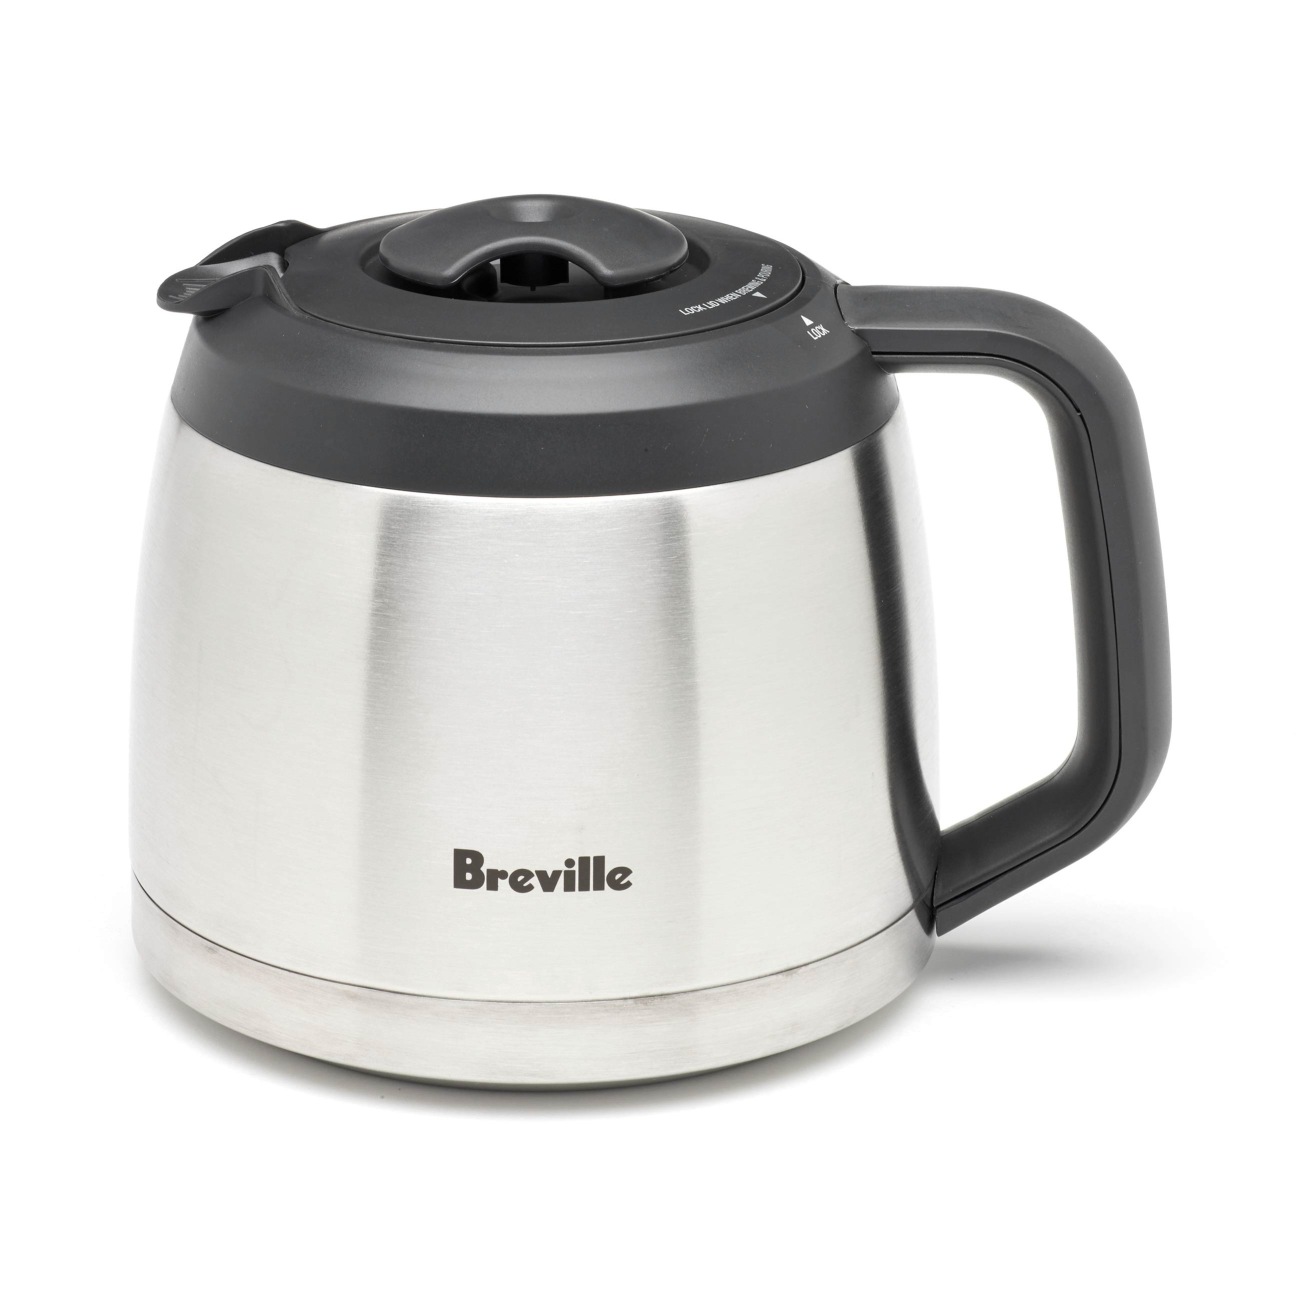 Breville Kettle Replacement Parts | Motorjdi.co